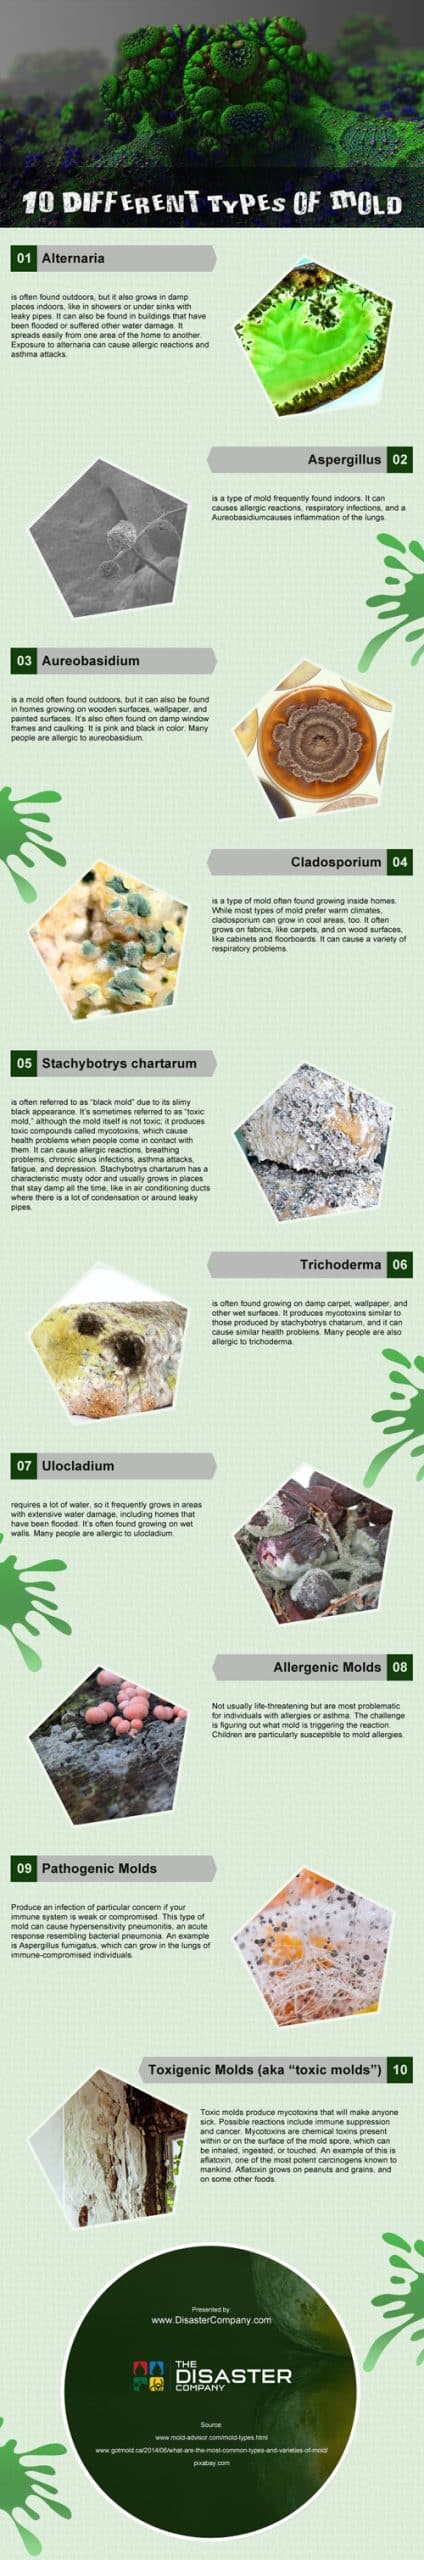 10 Different Types of Mold [infographic]